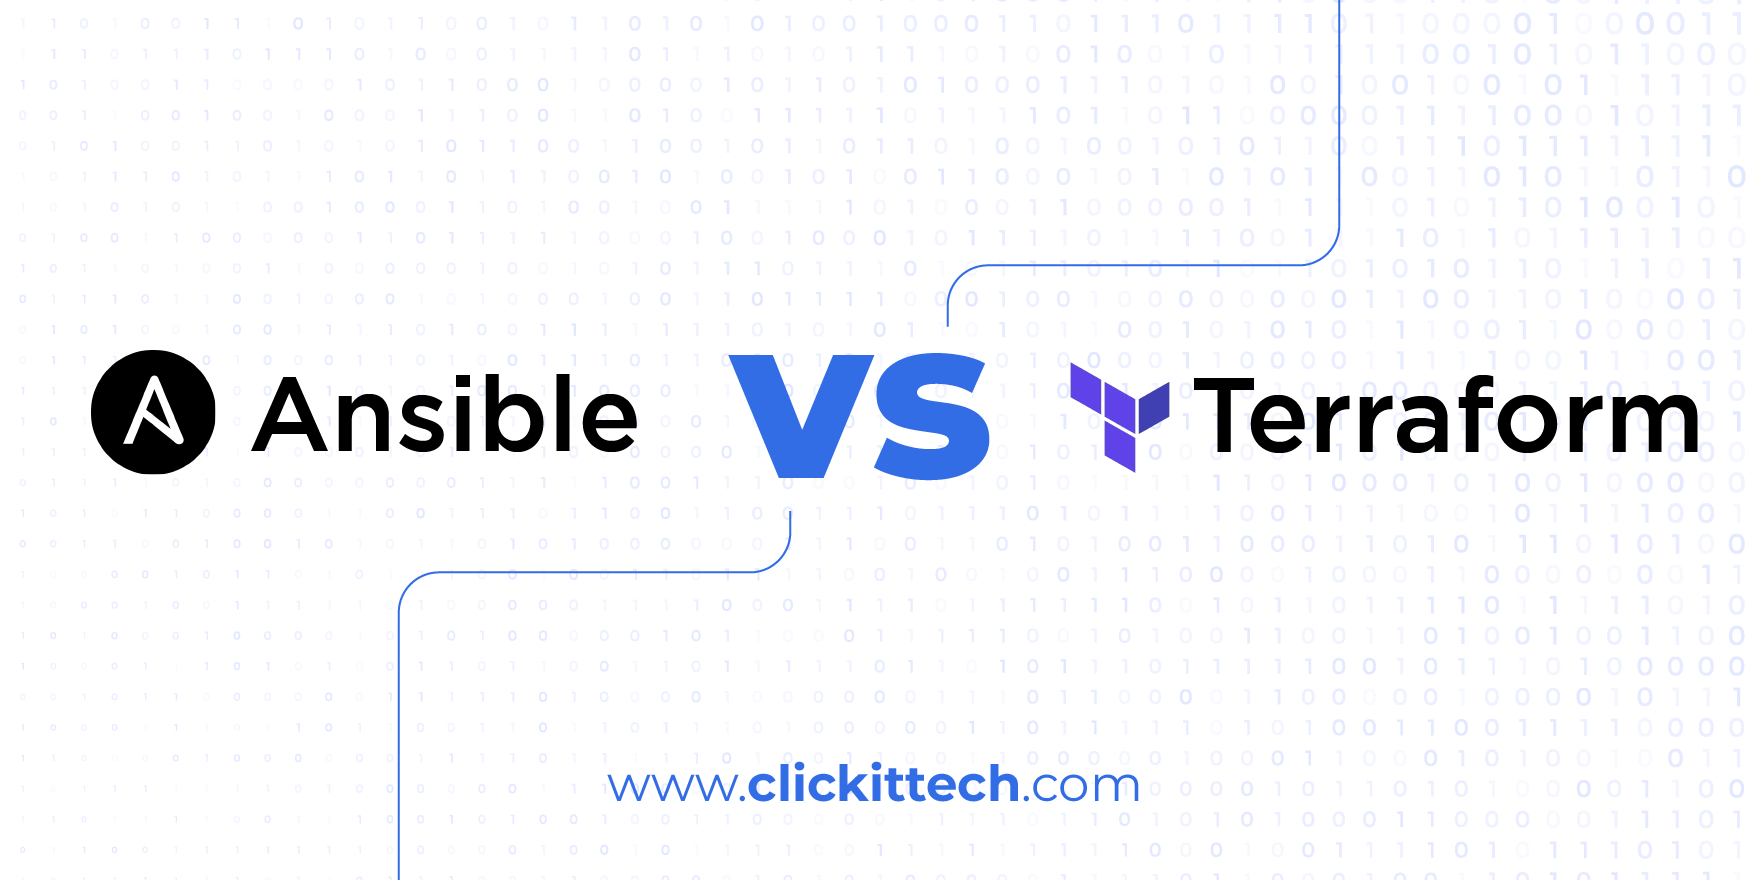 Differences Between Ansible vs Terraform